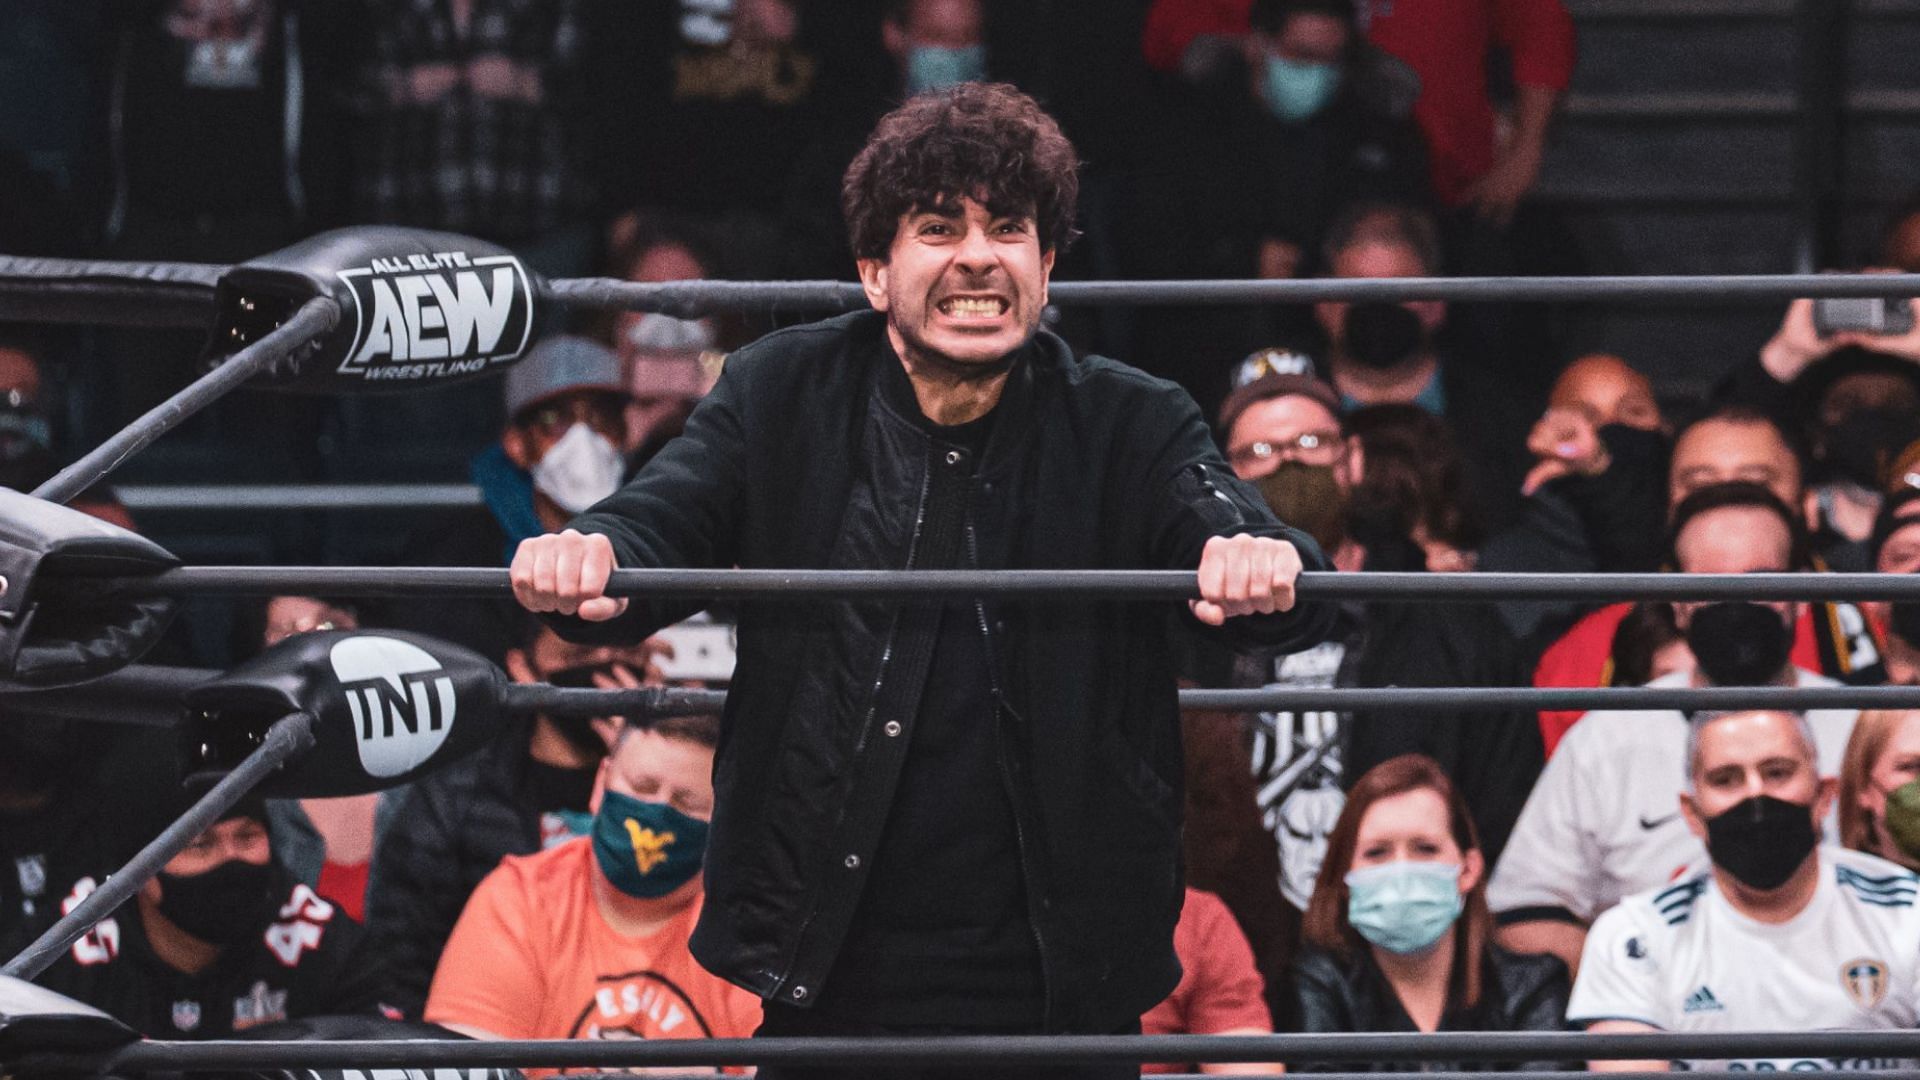 Tony Khan at an AEW event in 2022 (credit: Jay Lee Photography)